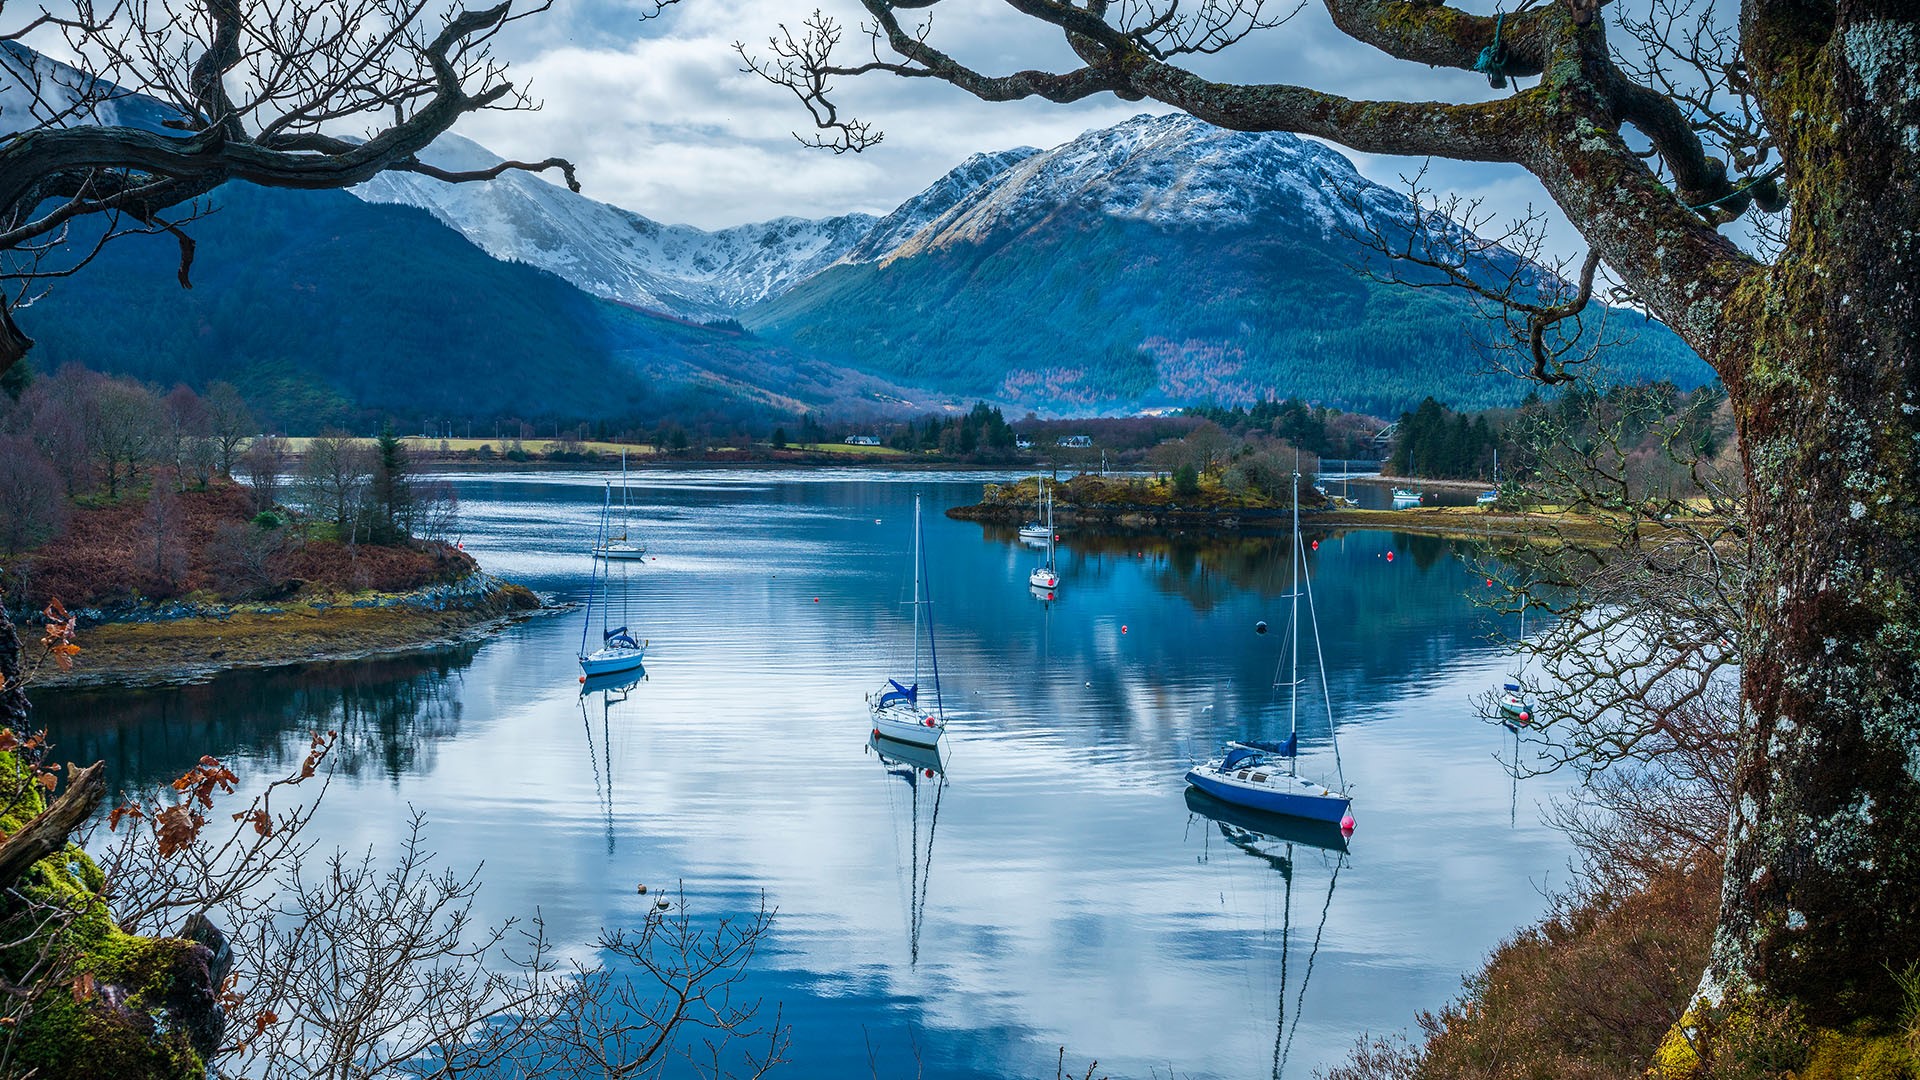 General 1920x1080 landscape nature sailboats lake mountains reflection Scotland fall snow forest house UK Loch Leven